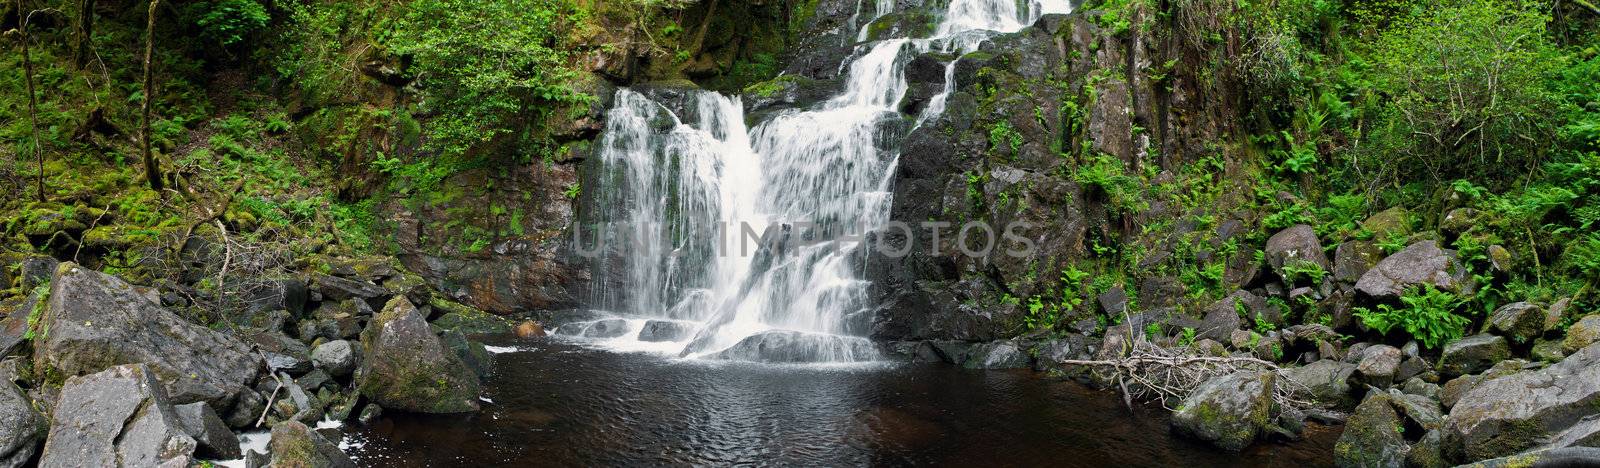 Torc waterfall by luissantos84